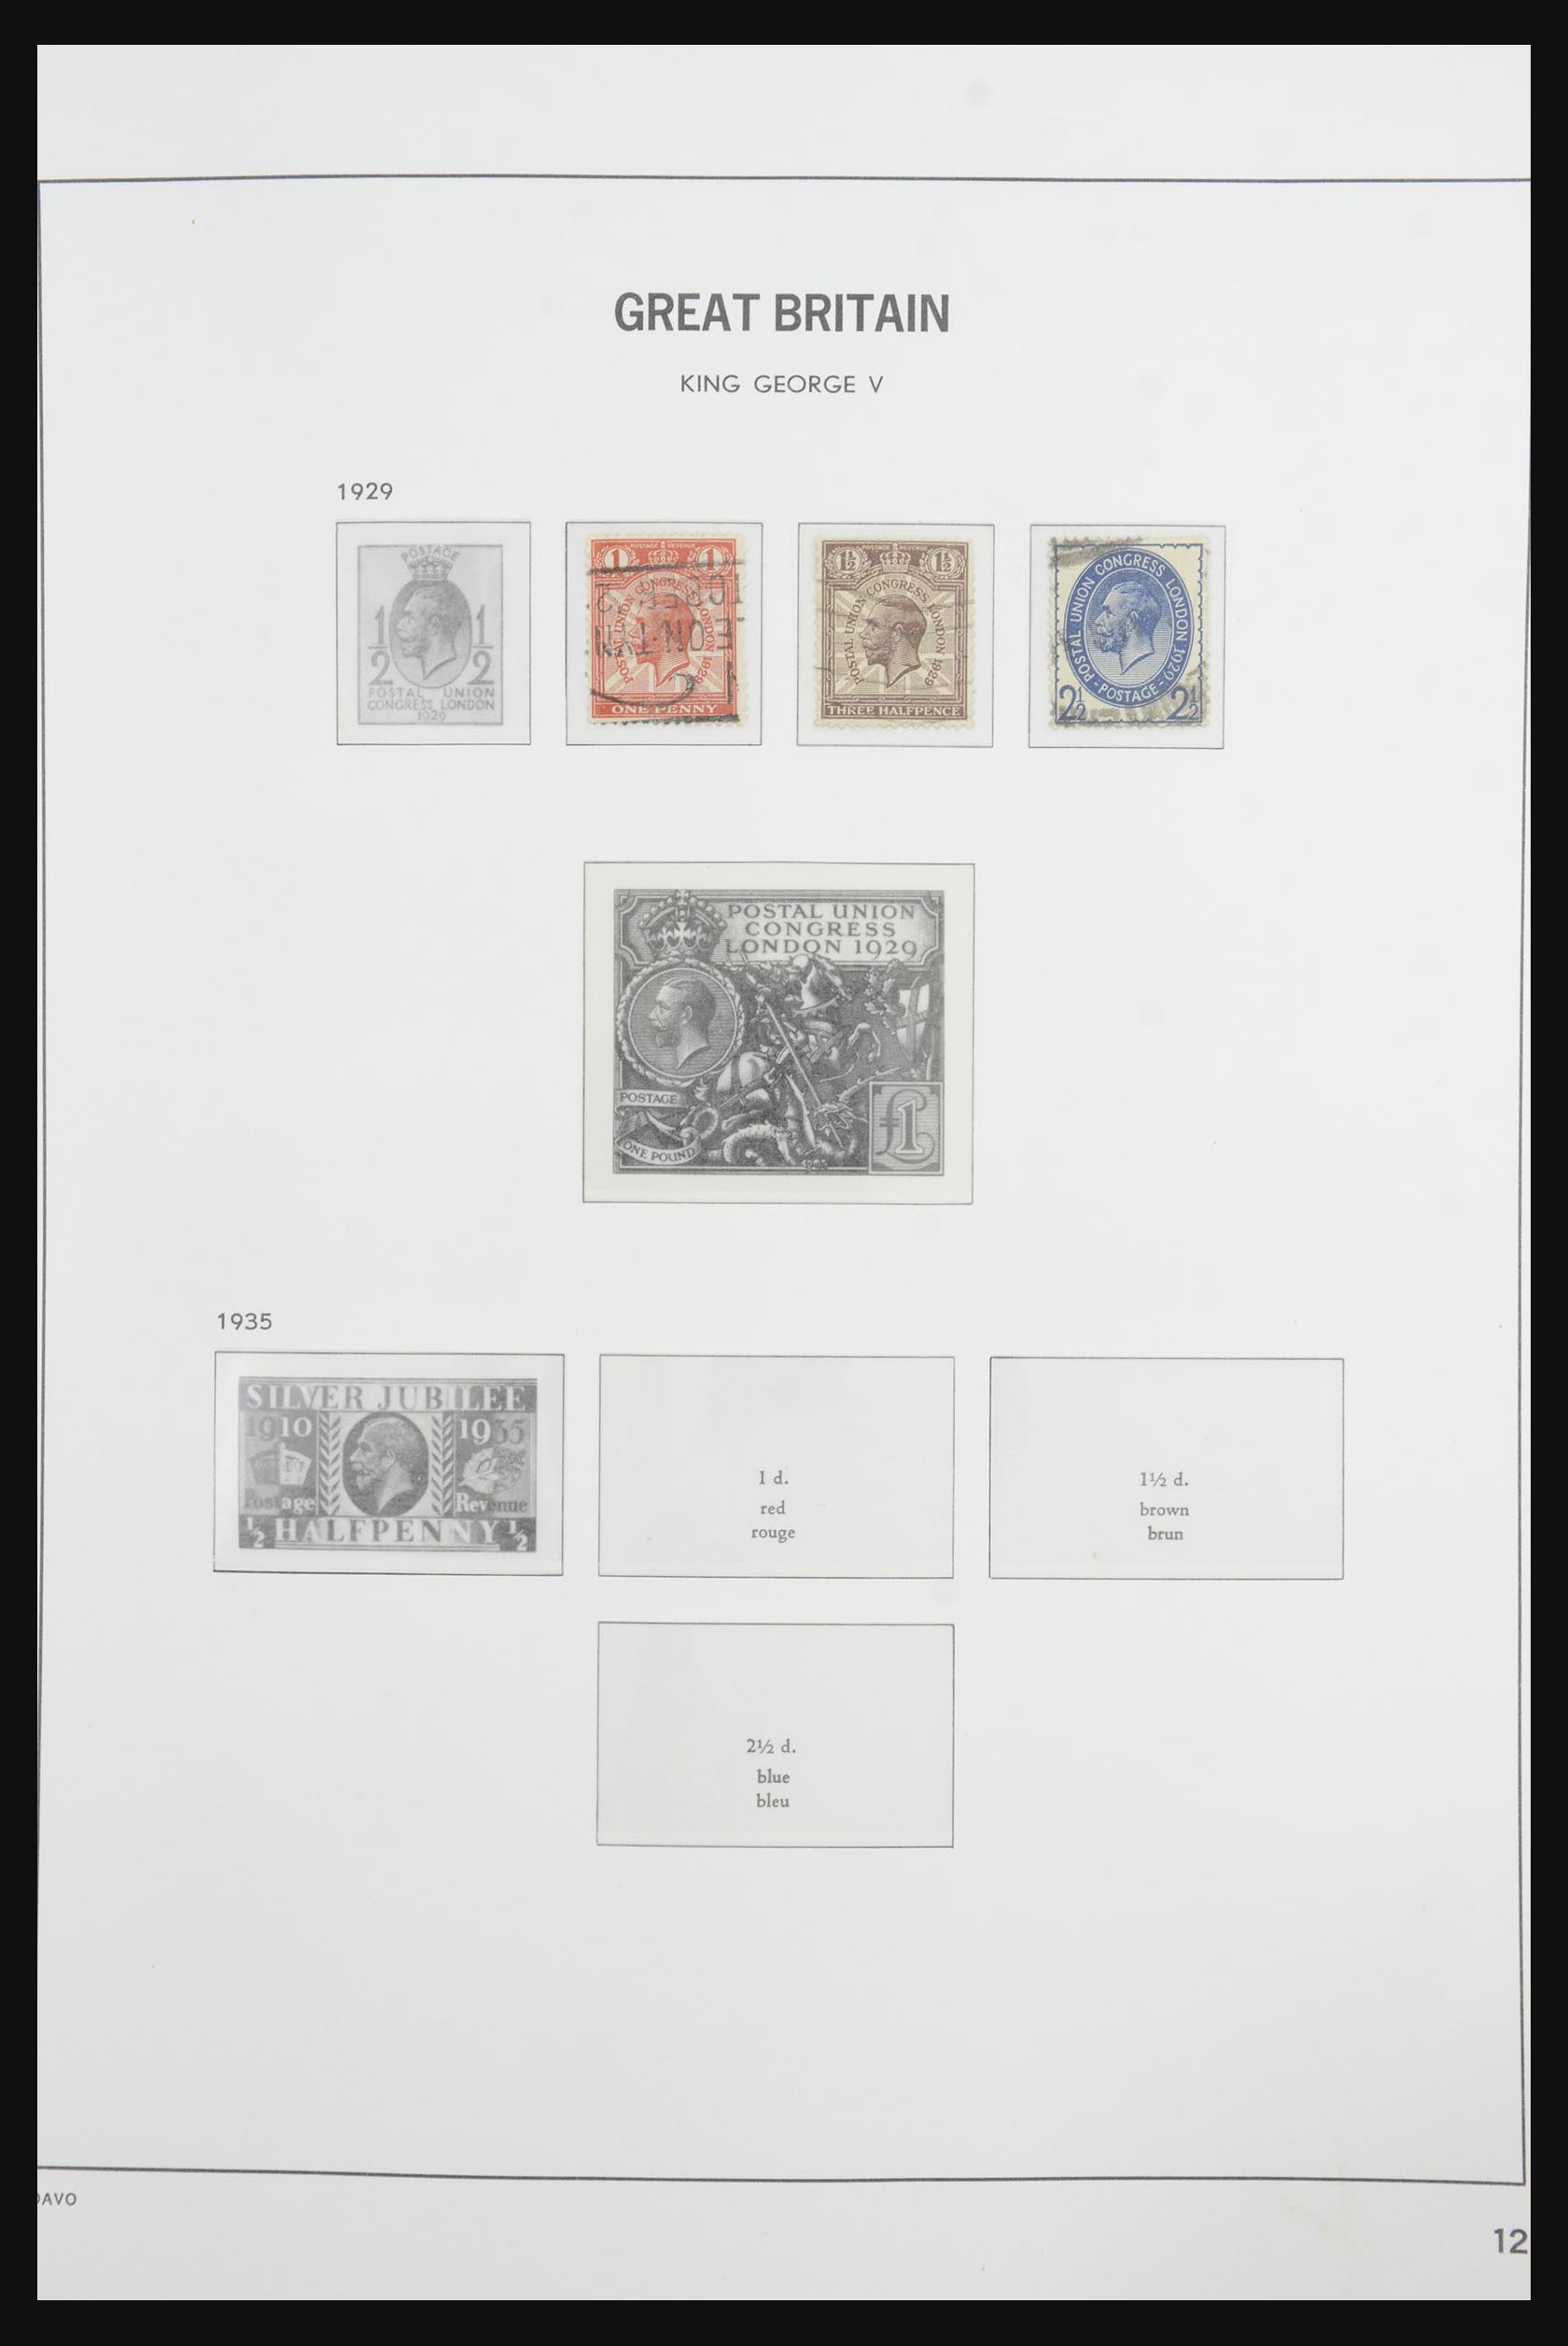 31606 004 - 31606 Great Britain and territories 1840-1950.